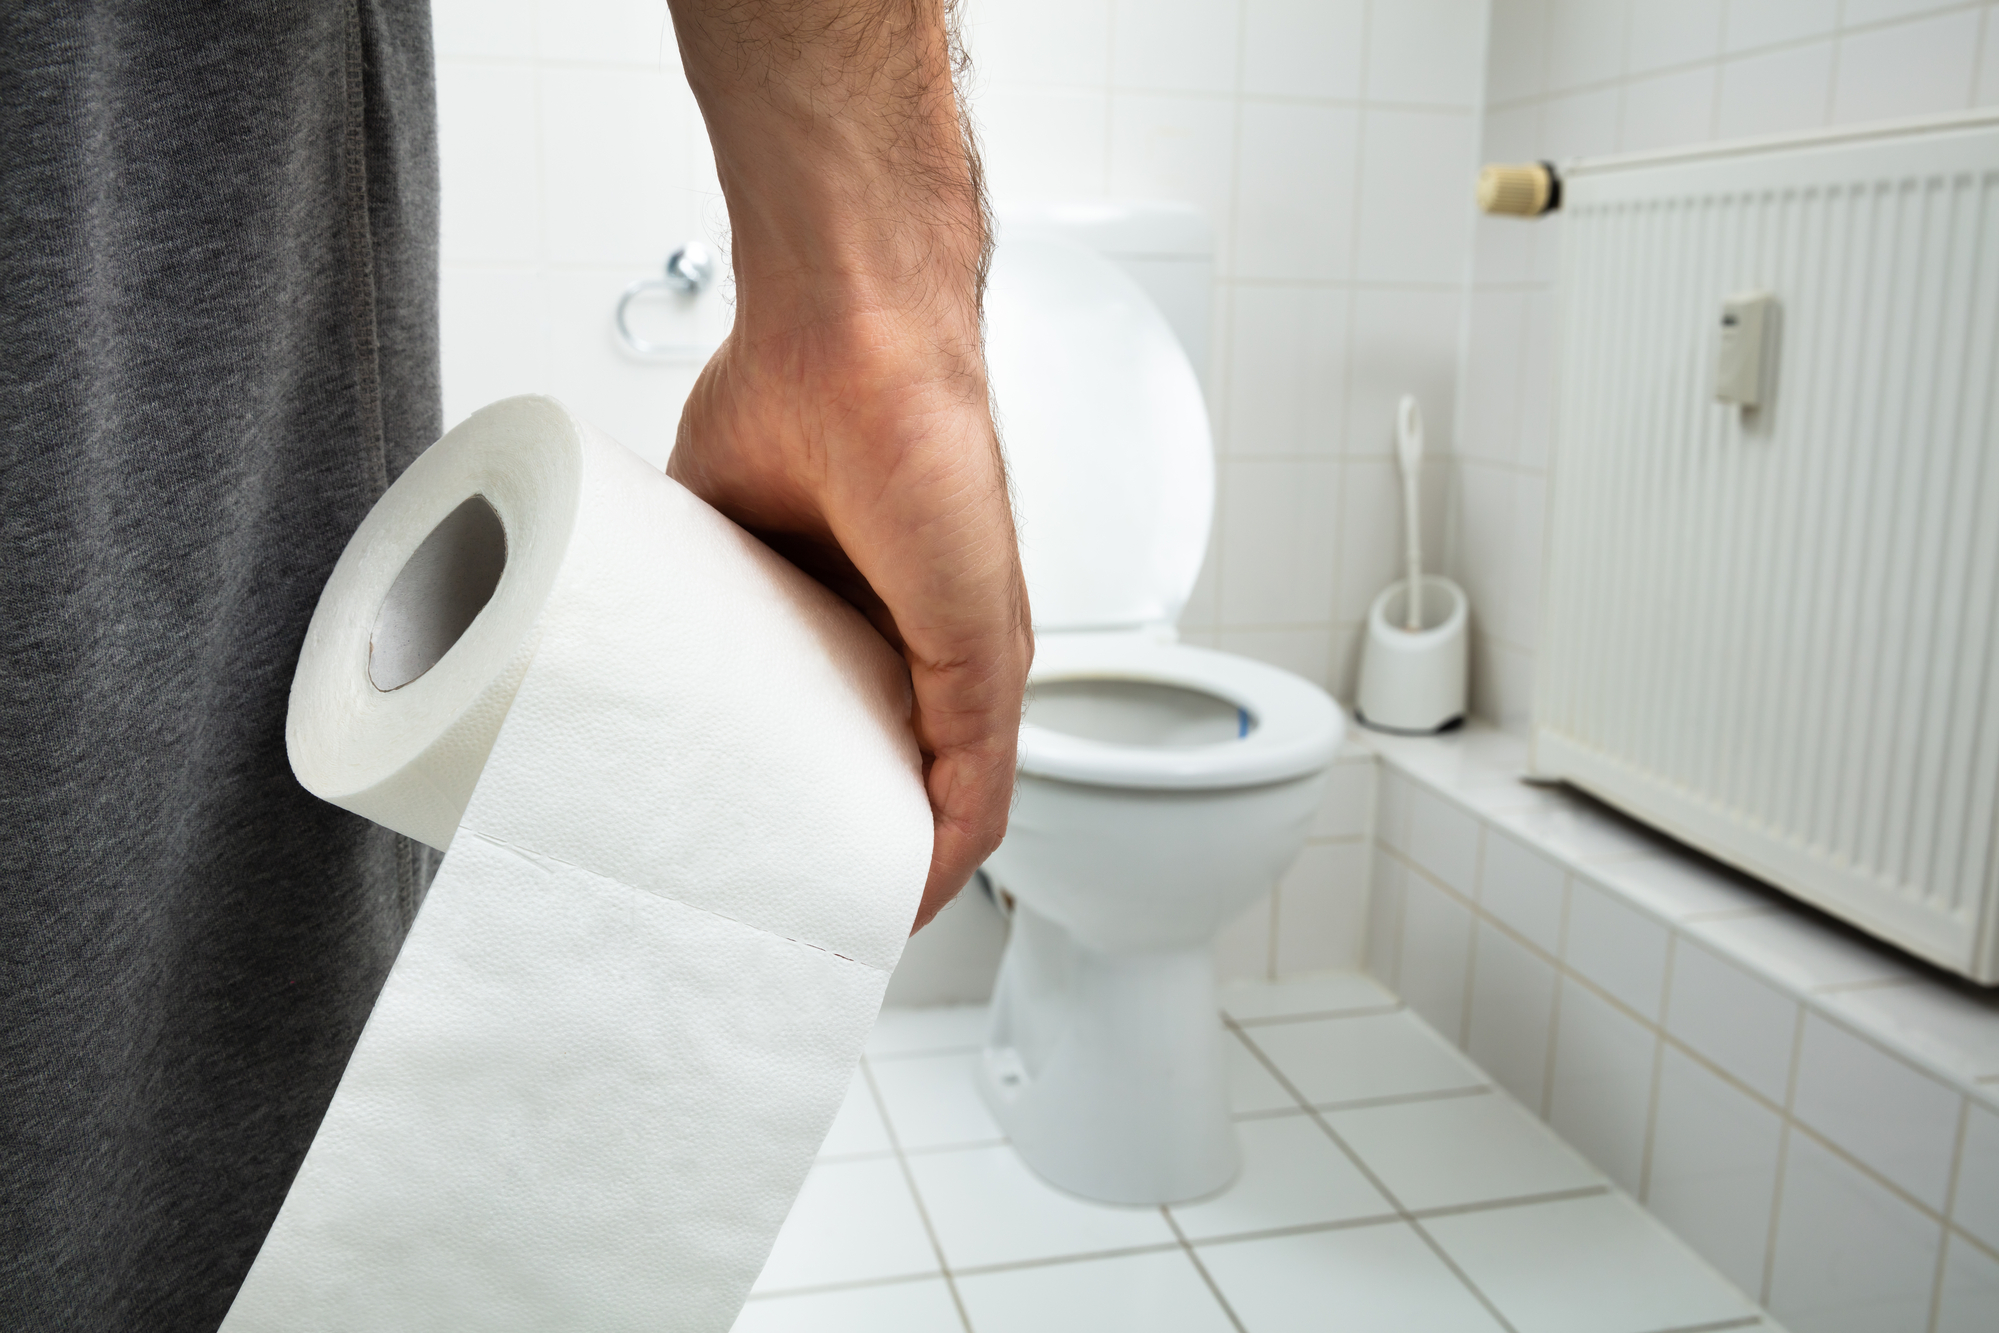 Man Suffers From Diarrhea Holding Tissue Paper Roll